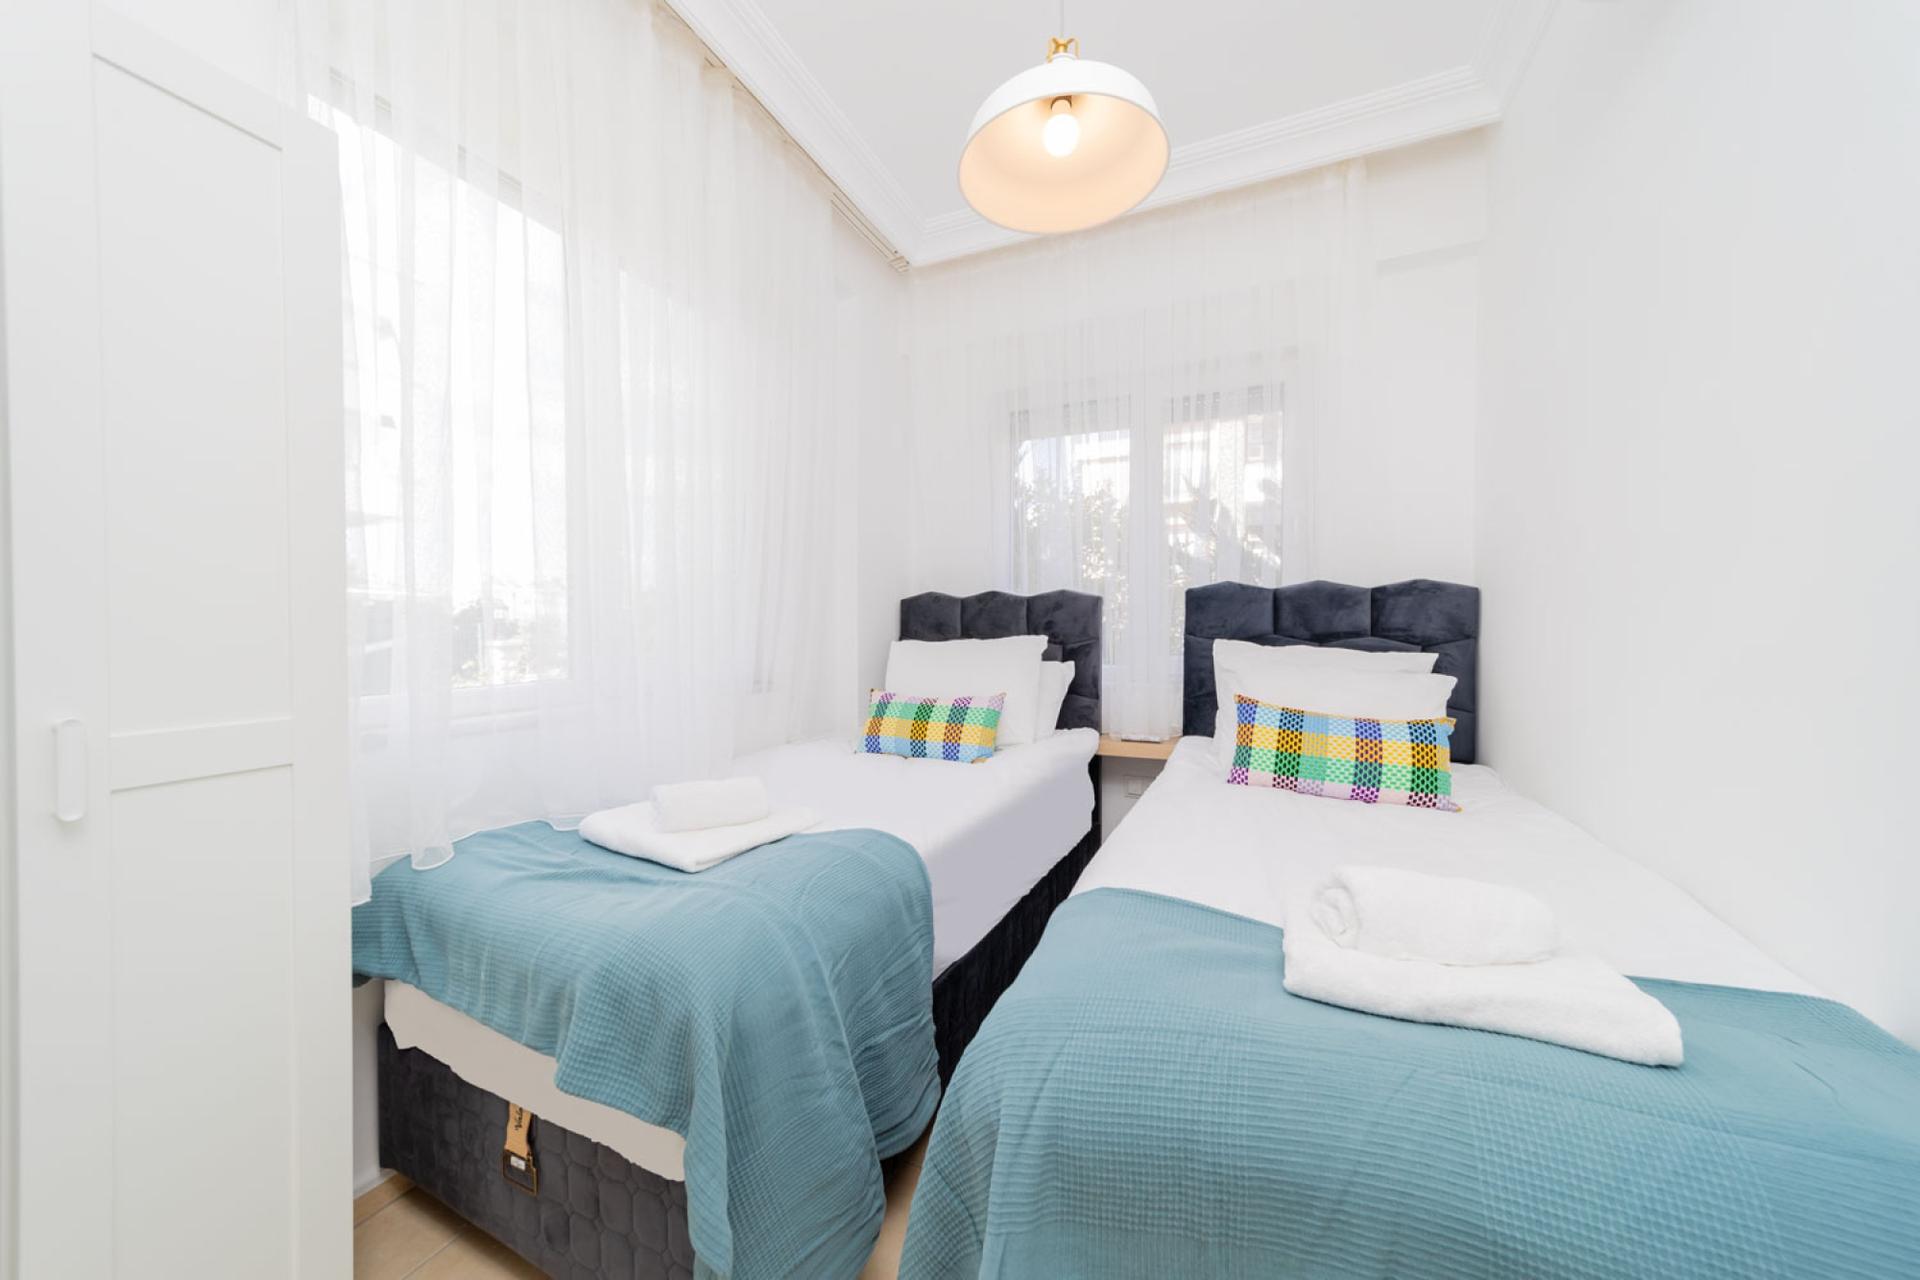 The second bedroom includes two single beds, which can be converted into a double bed.